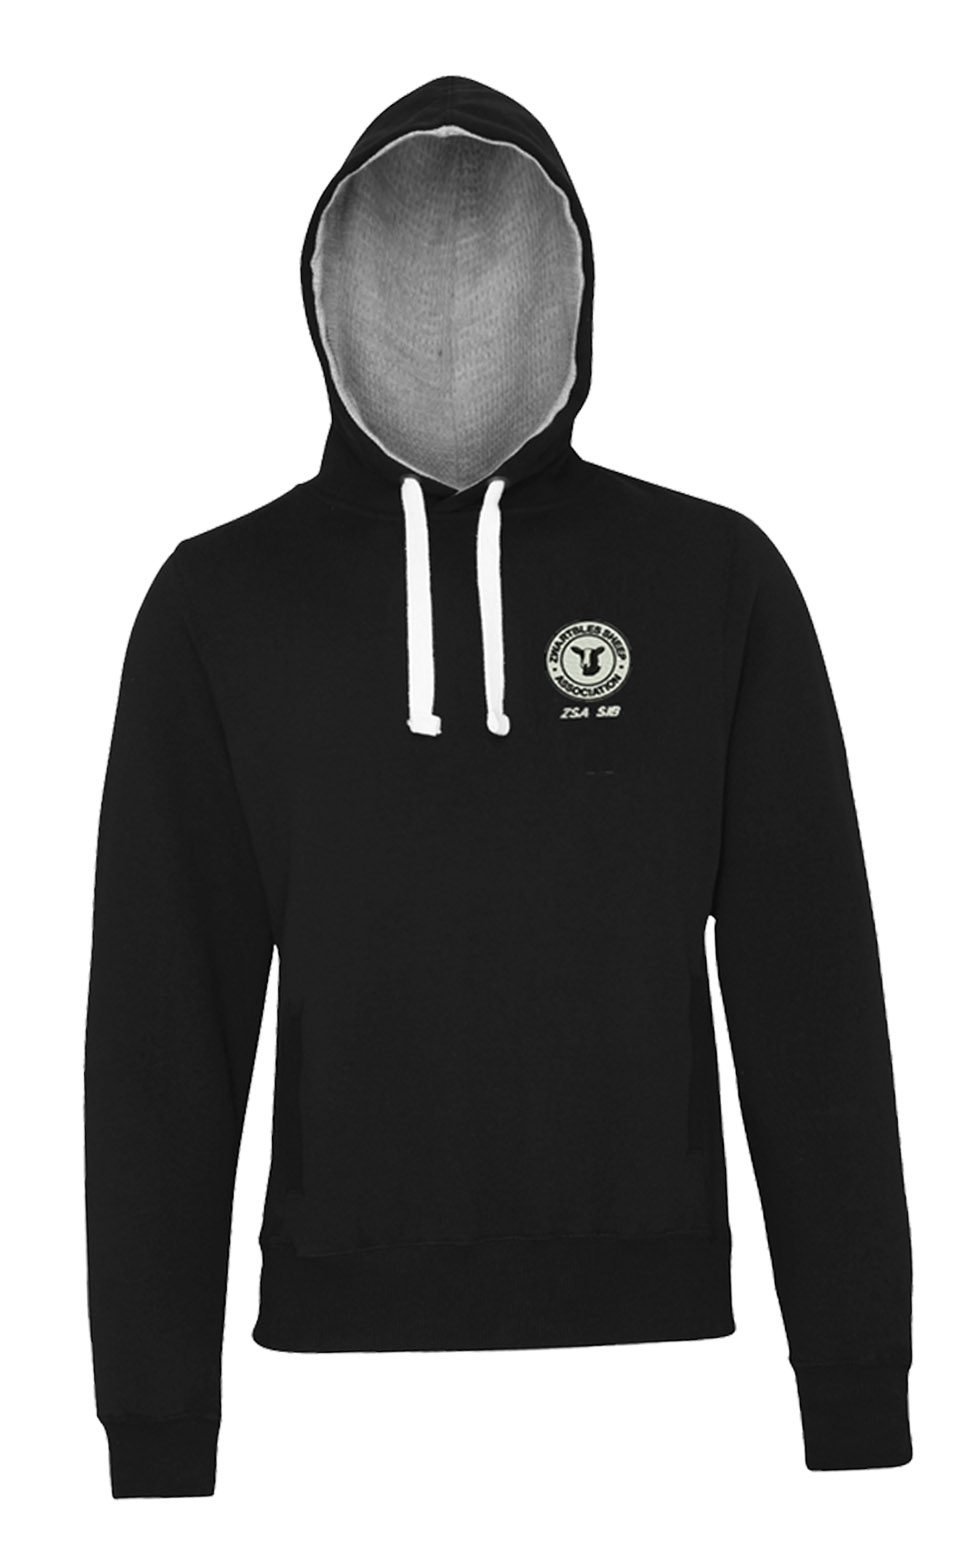 products-zsa-sir_hoody_jh100_jetblack_ft_1_